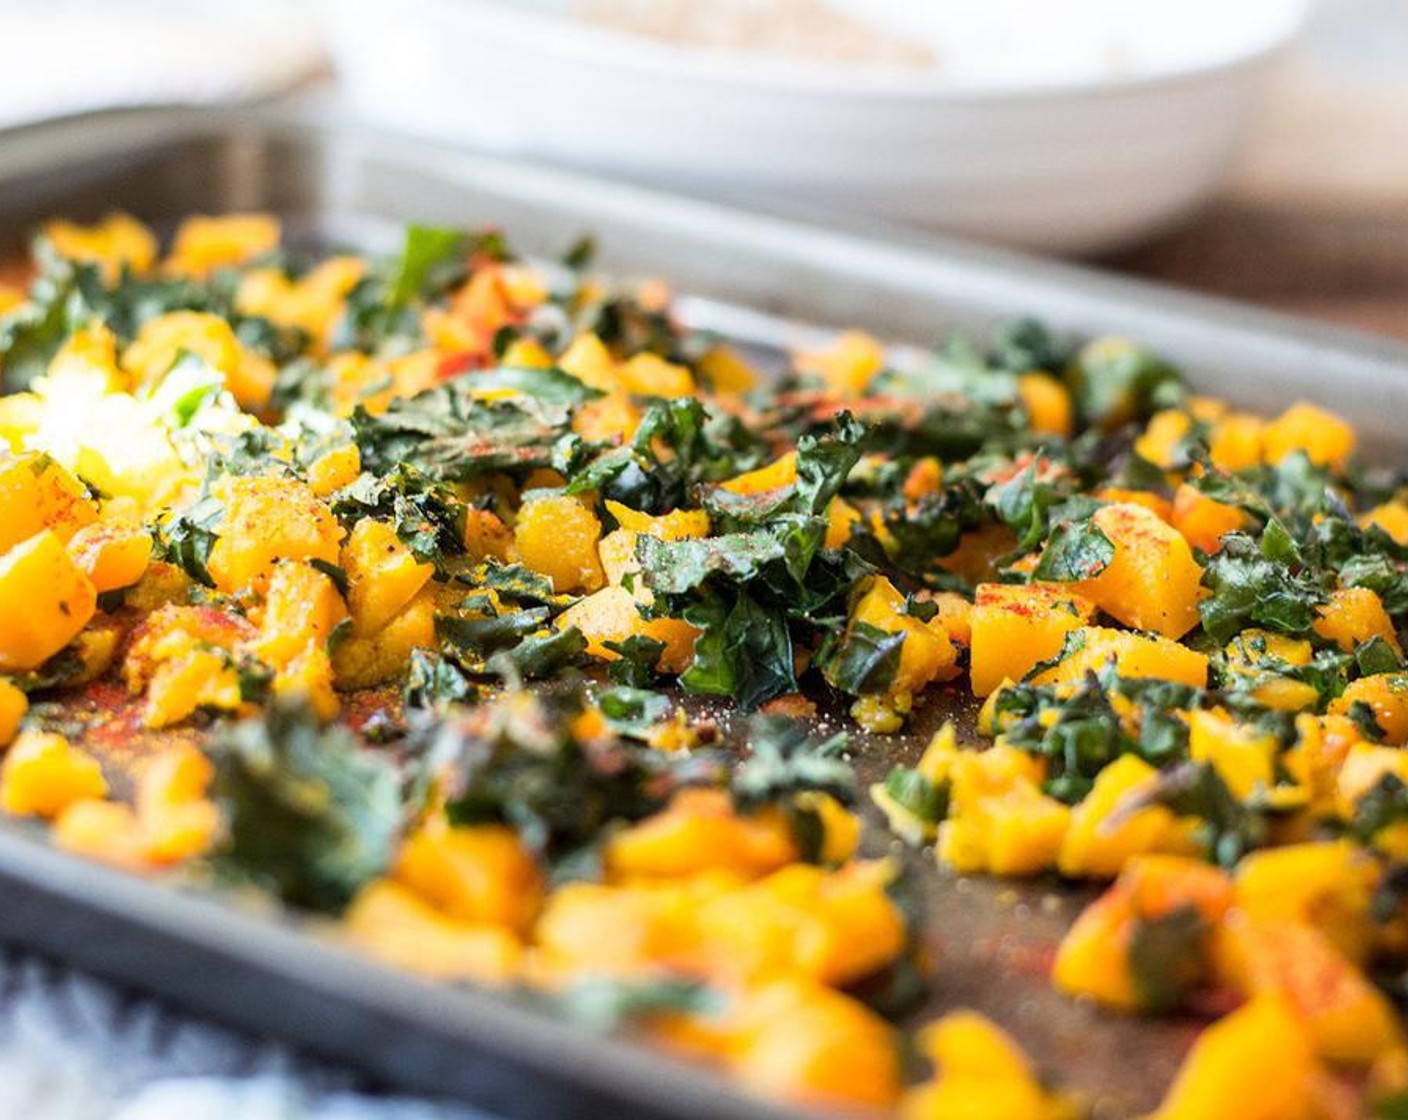 step 4 Remove from oven and add Kale (2 cups) to pan, toss to combine with spatula or wooden spoon, then return butternut squash and kale to oven and bake another 5-6 minutes or until squash is soft and baked through.